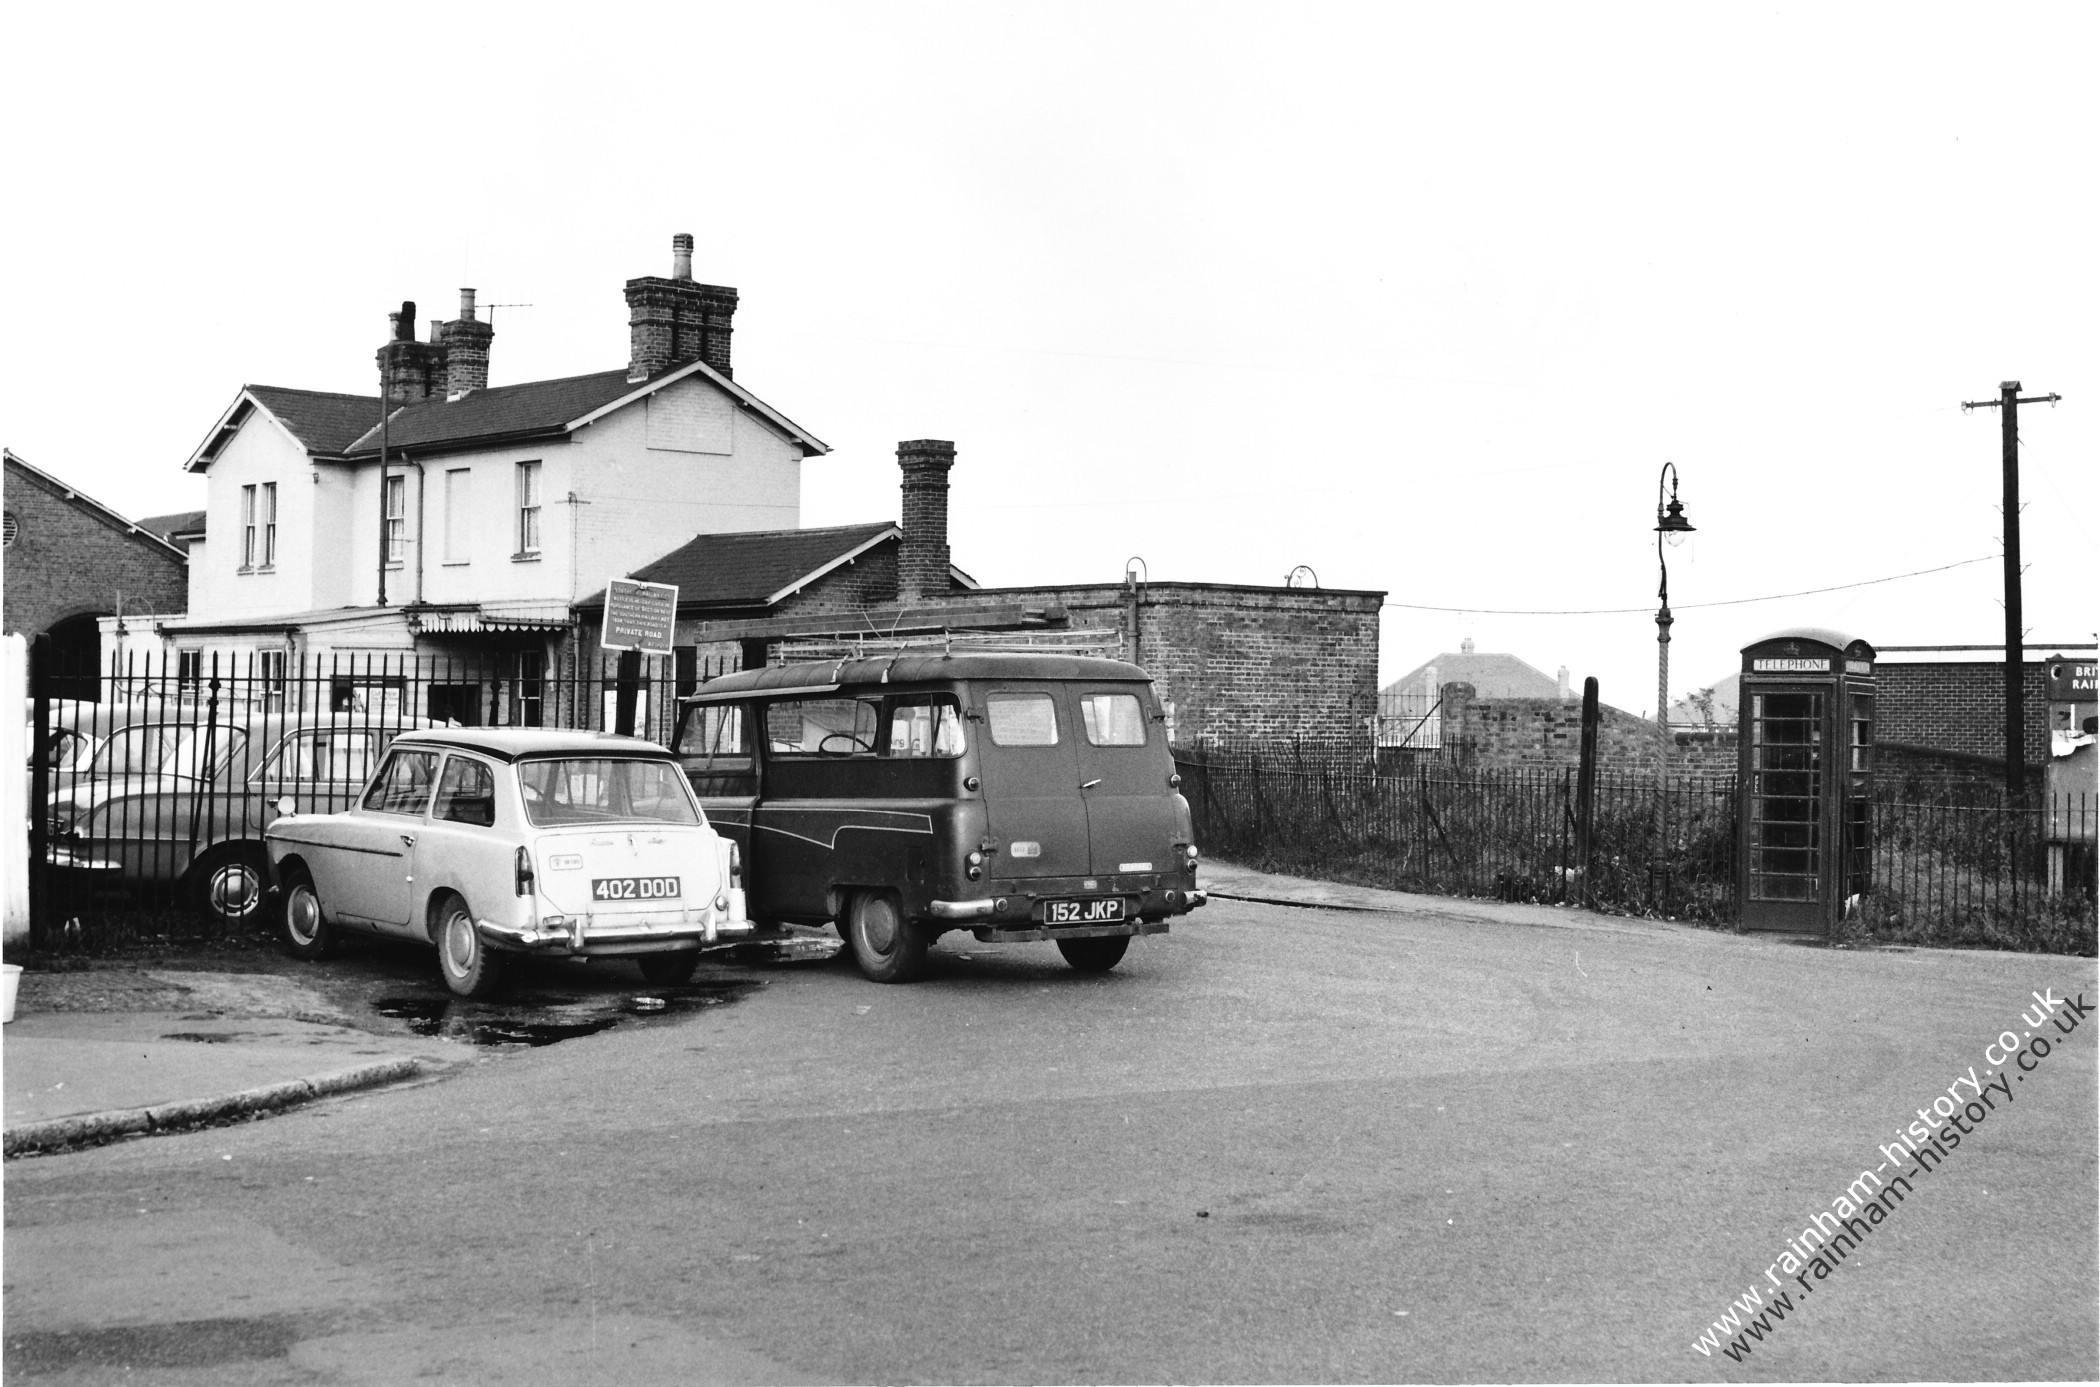 View of the station building from Station Road showing phone box on the corner. Multiple cars are visible in the picture, Austin A40 Farina registration 402DOD, Bedford CA van number plate 152 JKP. Over the railings is a Vauxhall Victor.